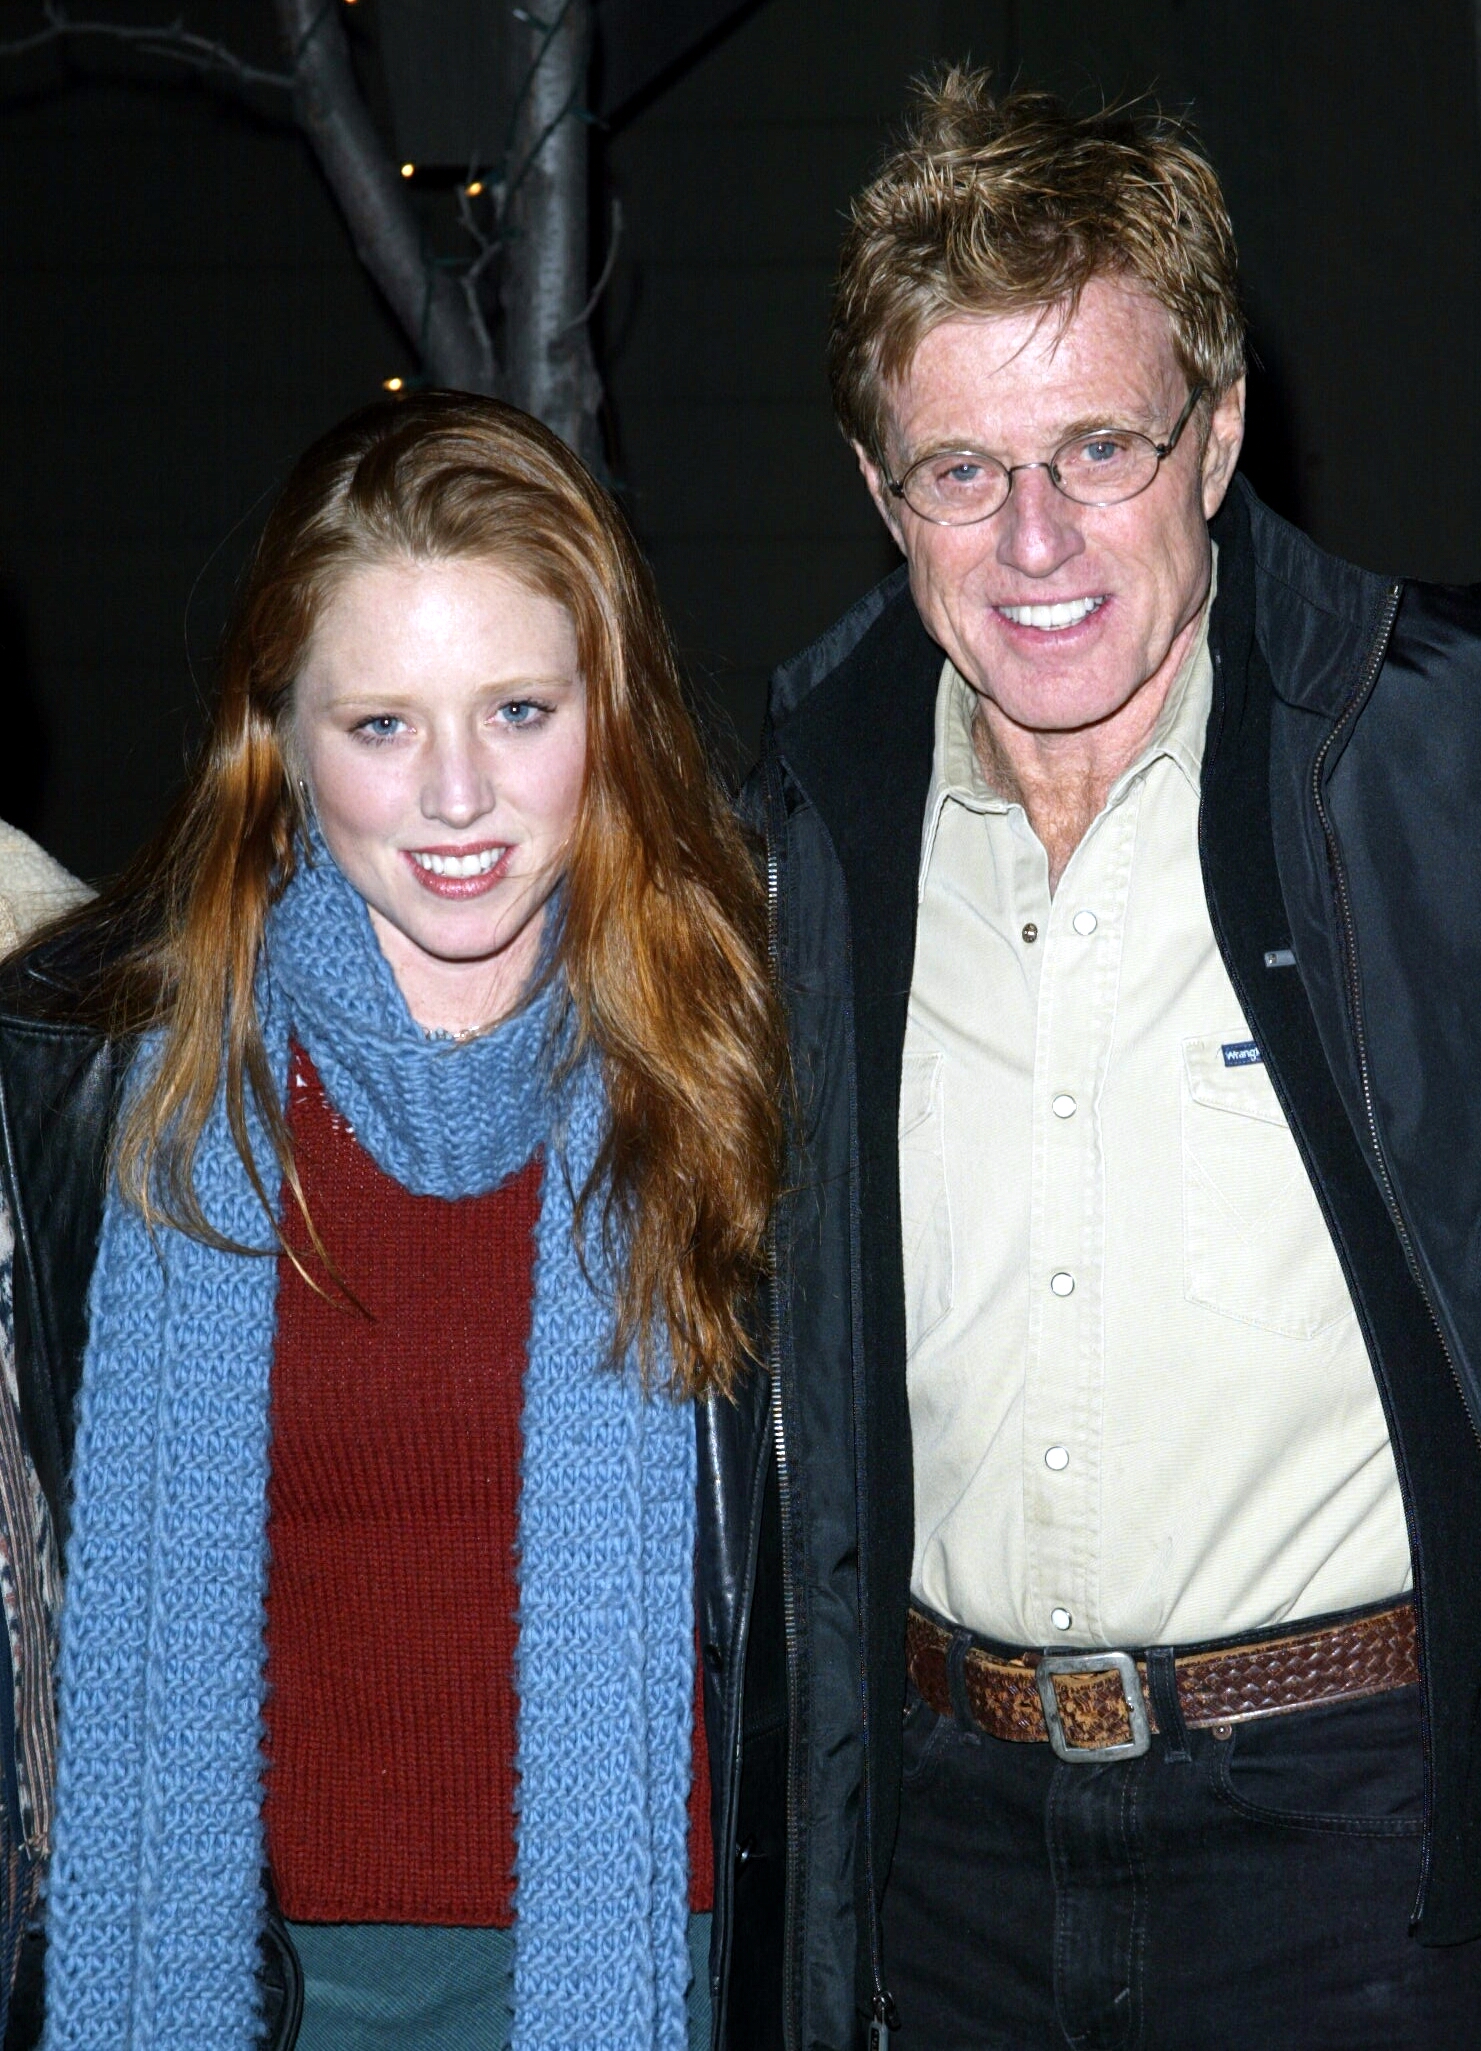 Amy Redford and Robert Redford attend the premiere of "Cry Funny Happy" at the 2003 Sundance Film Festival on January 18, 2003, in Park City, Utah. | Source: Getty Images